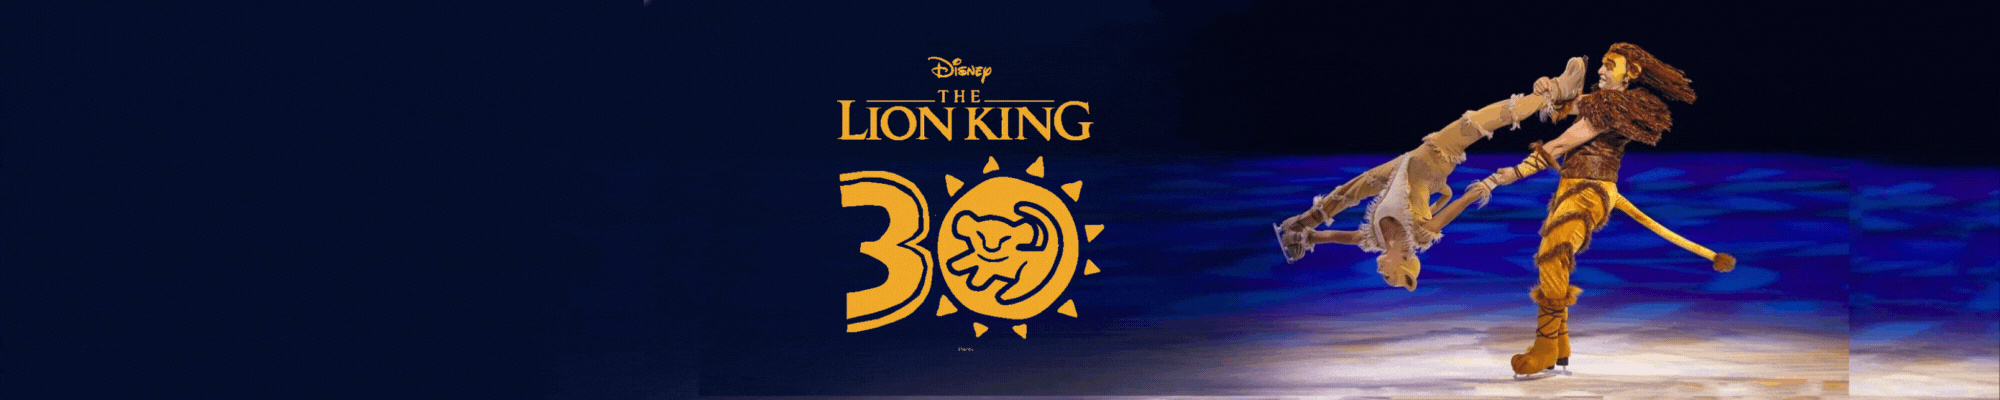 Celebrating 30 Years of The Lion King!